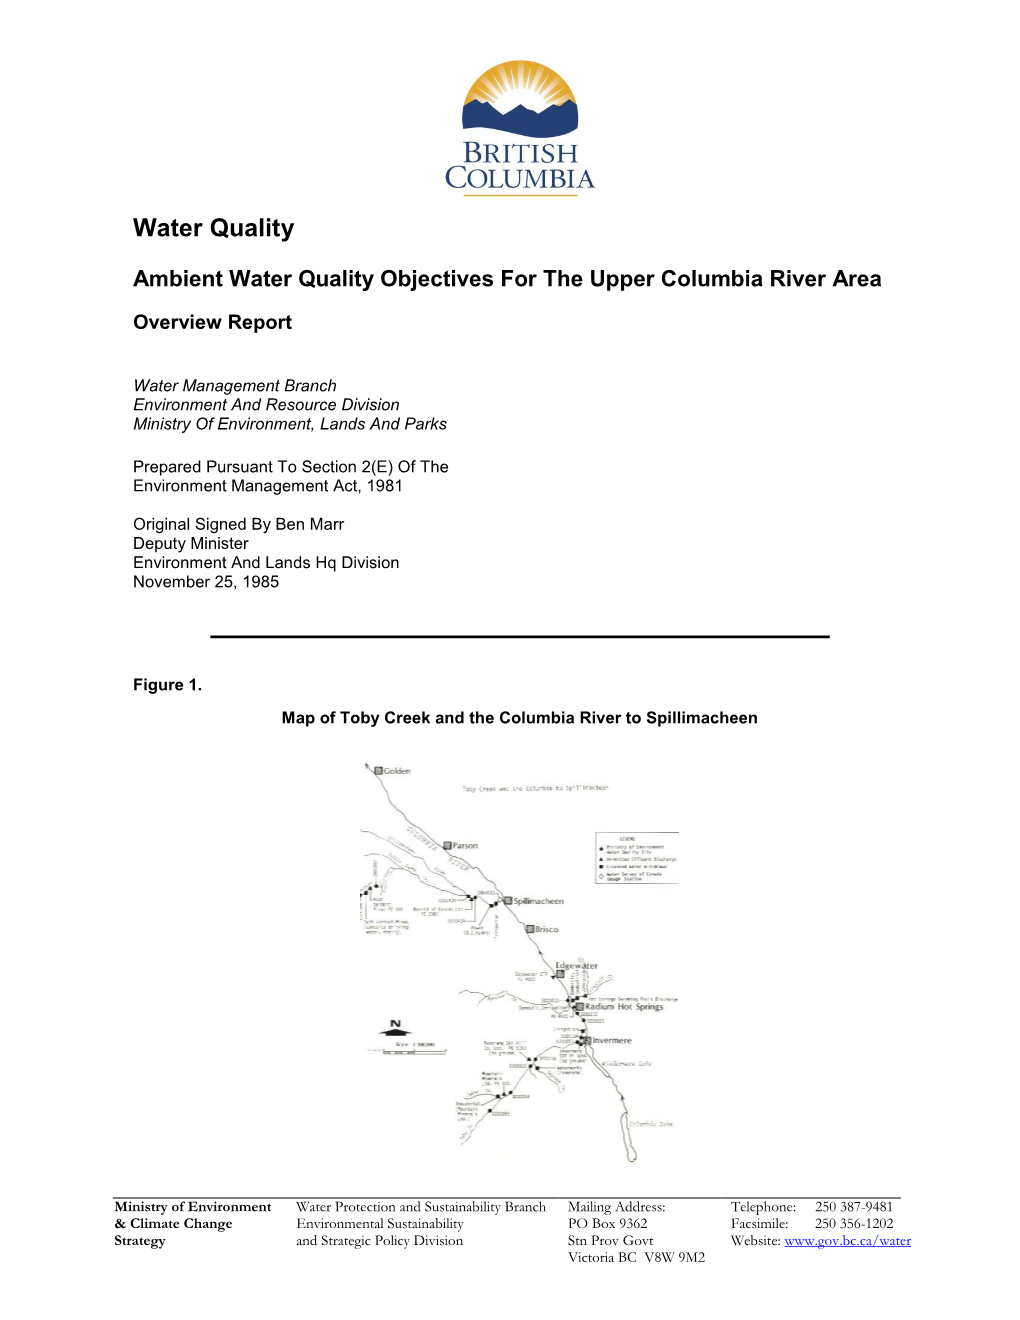 Ambient Water Quality Objectives for the Upper Columbia River Area